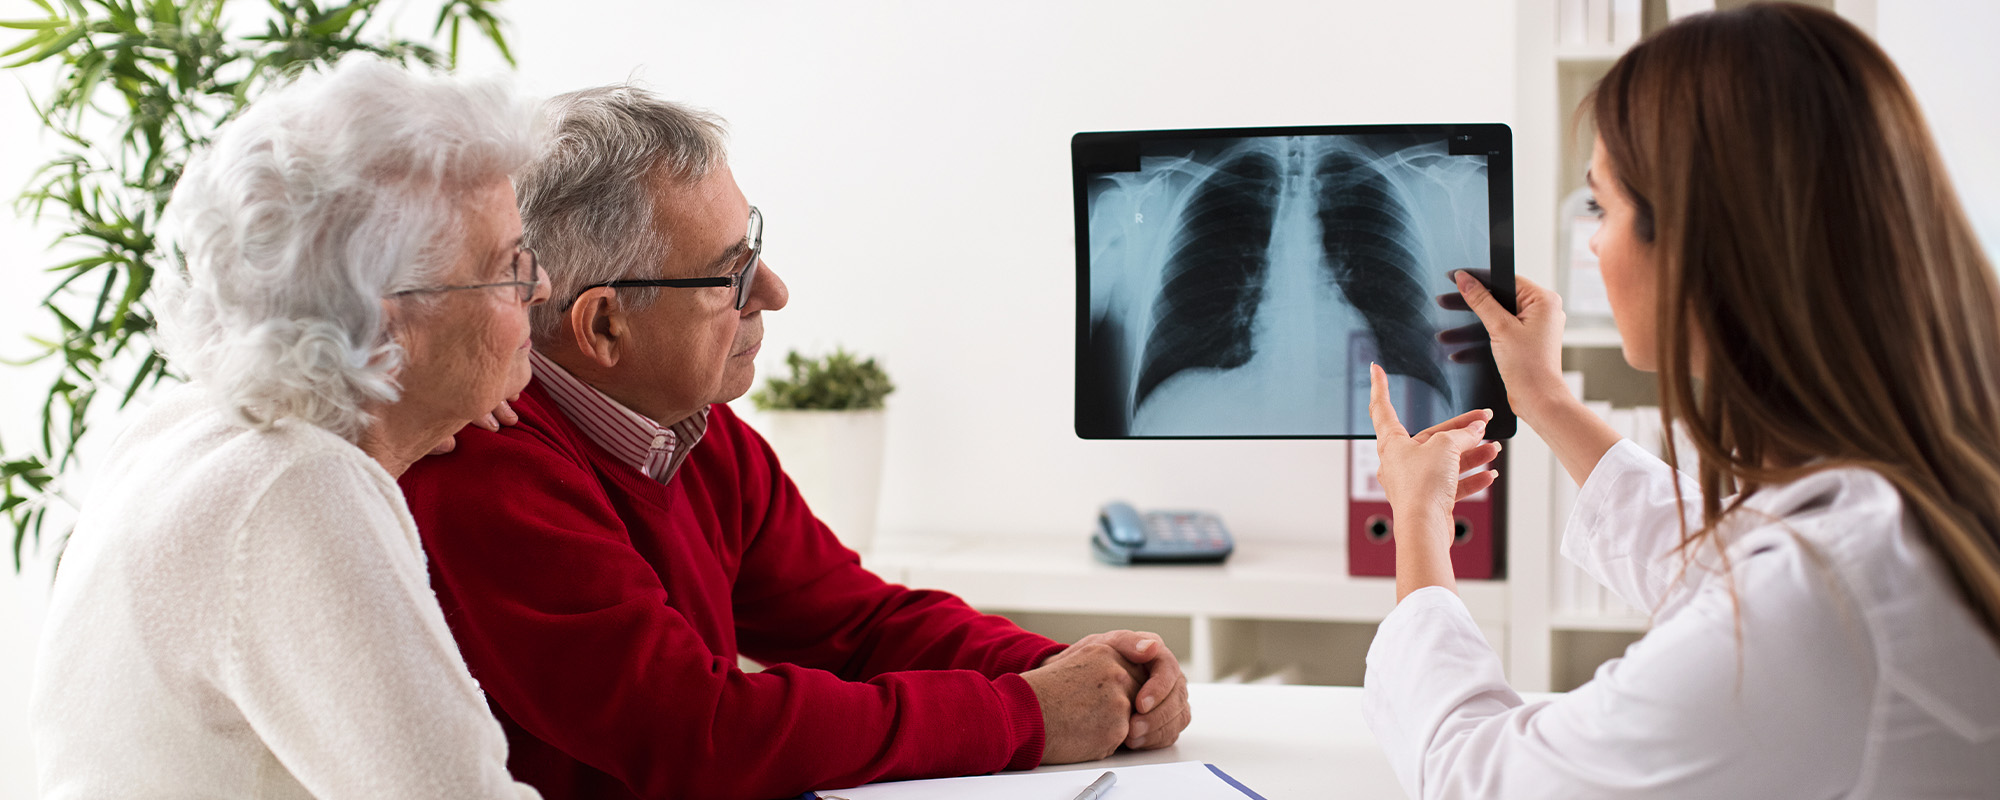 doctor shows results to old patient x ray of the lungs